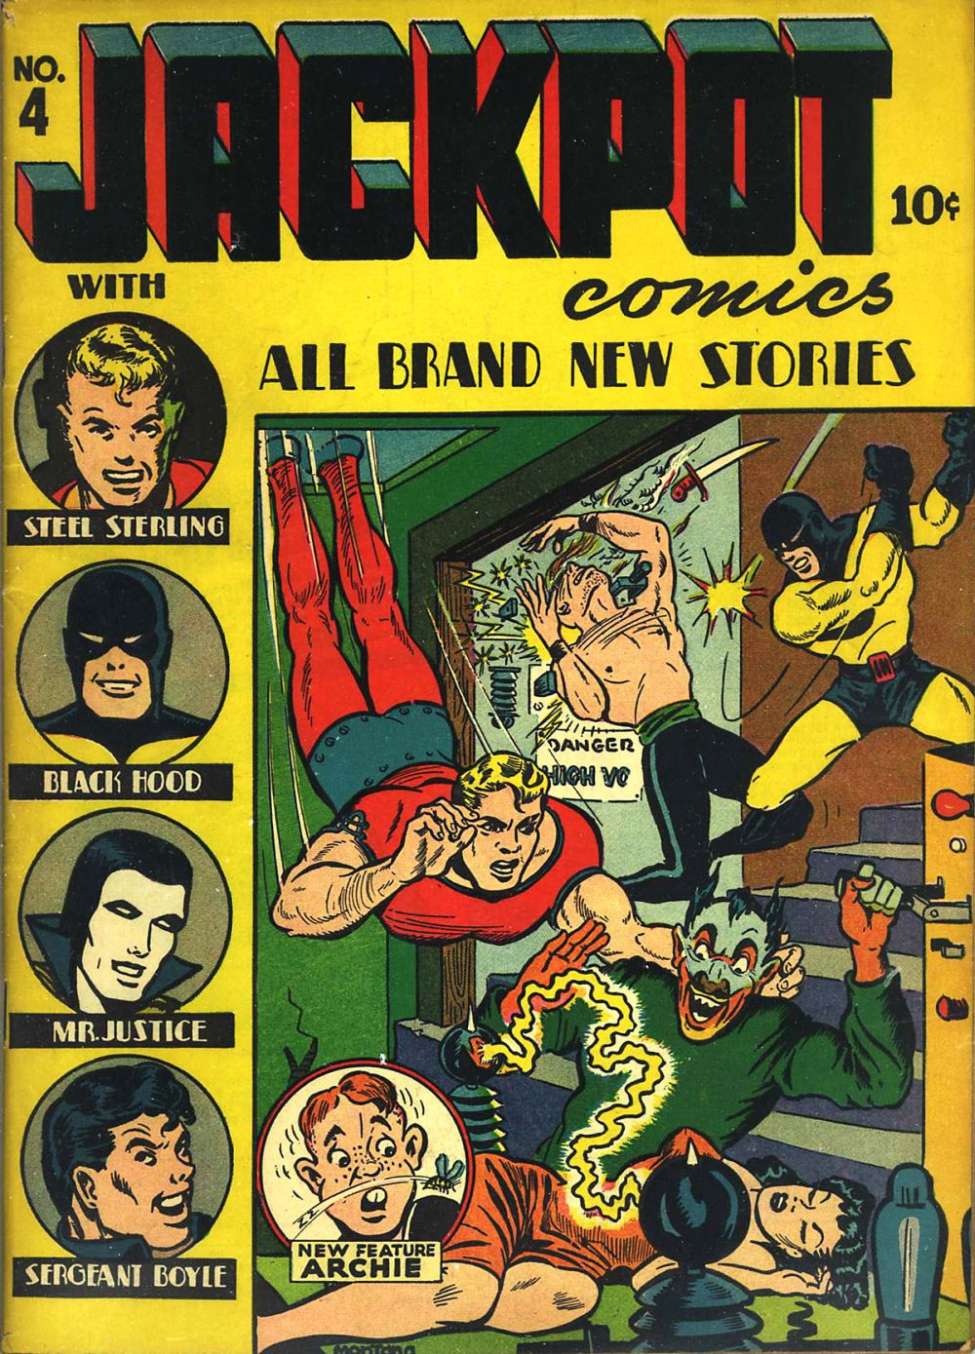 Book Cover For Archie in Jackpot Comics (04-09 - Win. 1941-Spr. 1943)